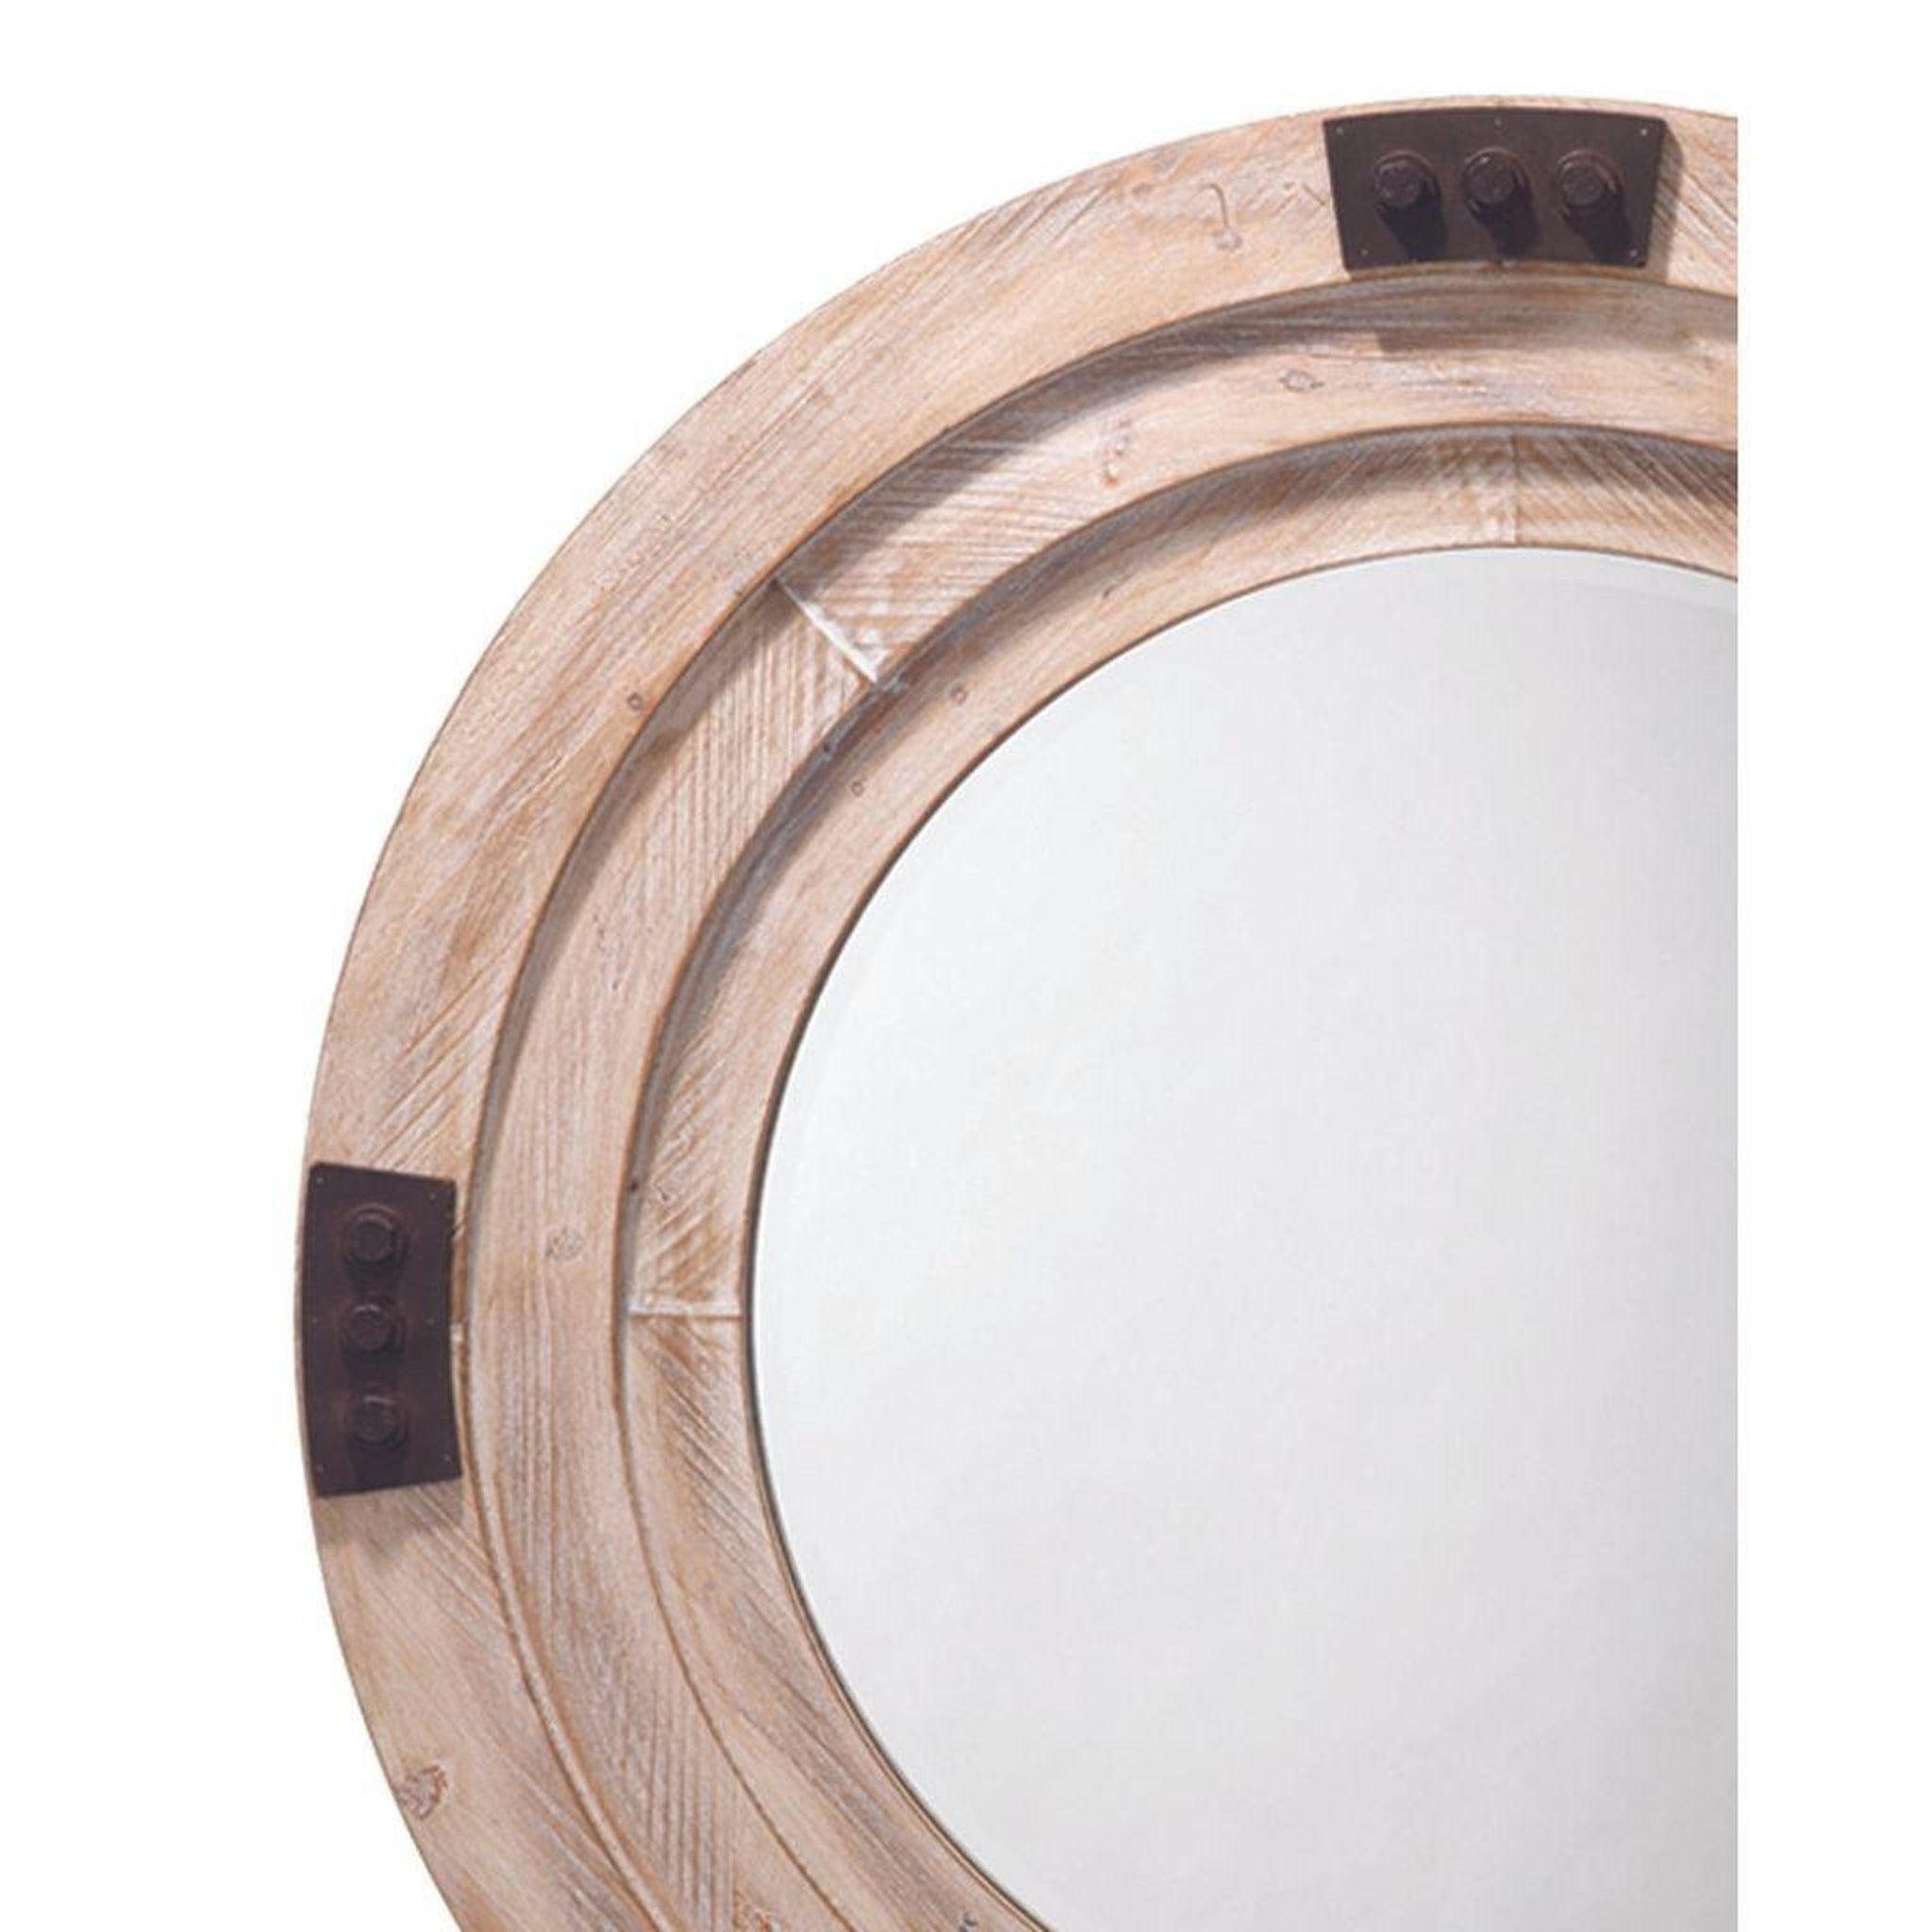 Jamie Young Co., Jamie Young Foreman 36" Round Mirror With White Washed Wood Frame and Iron Metal Accents